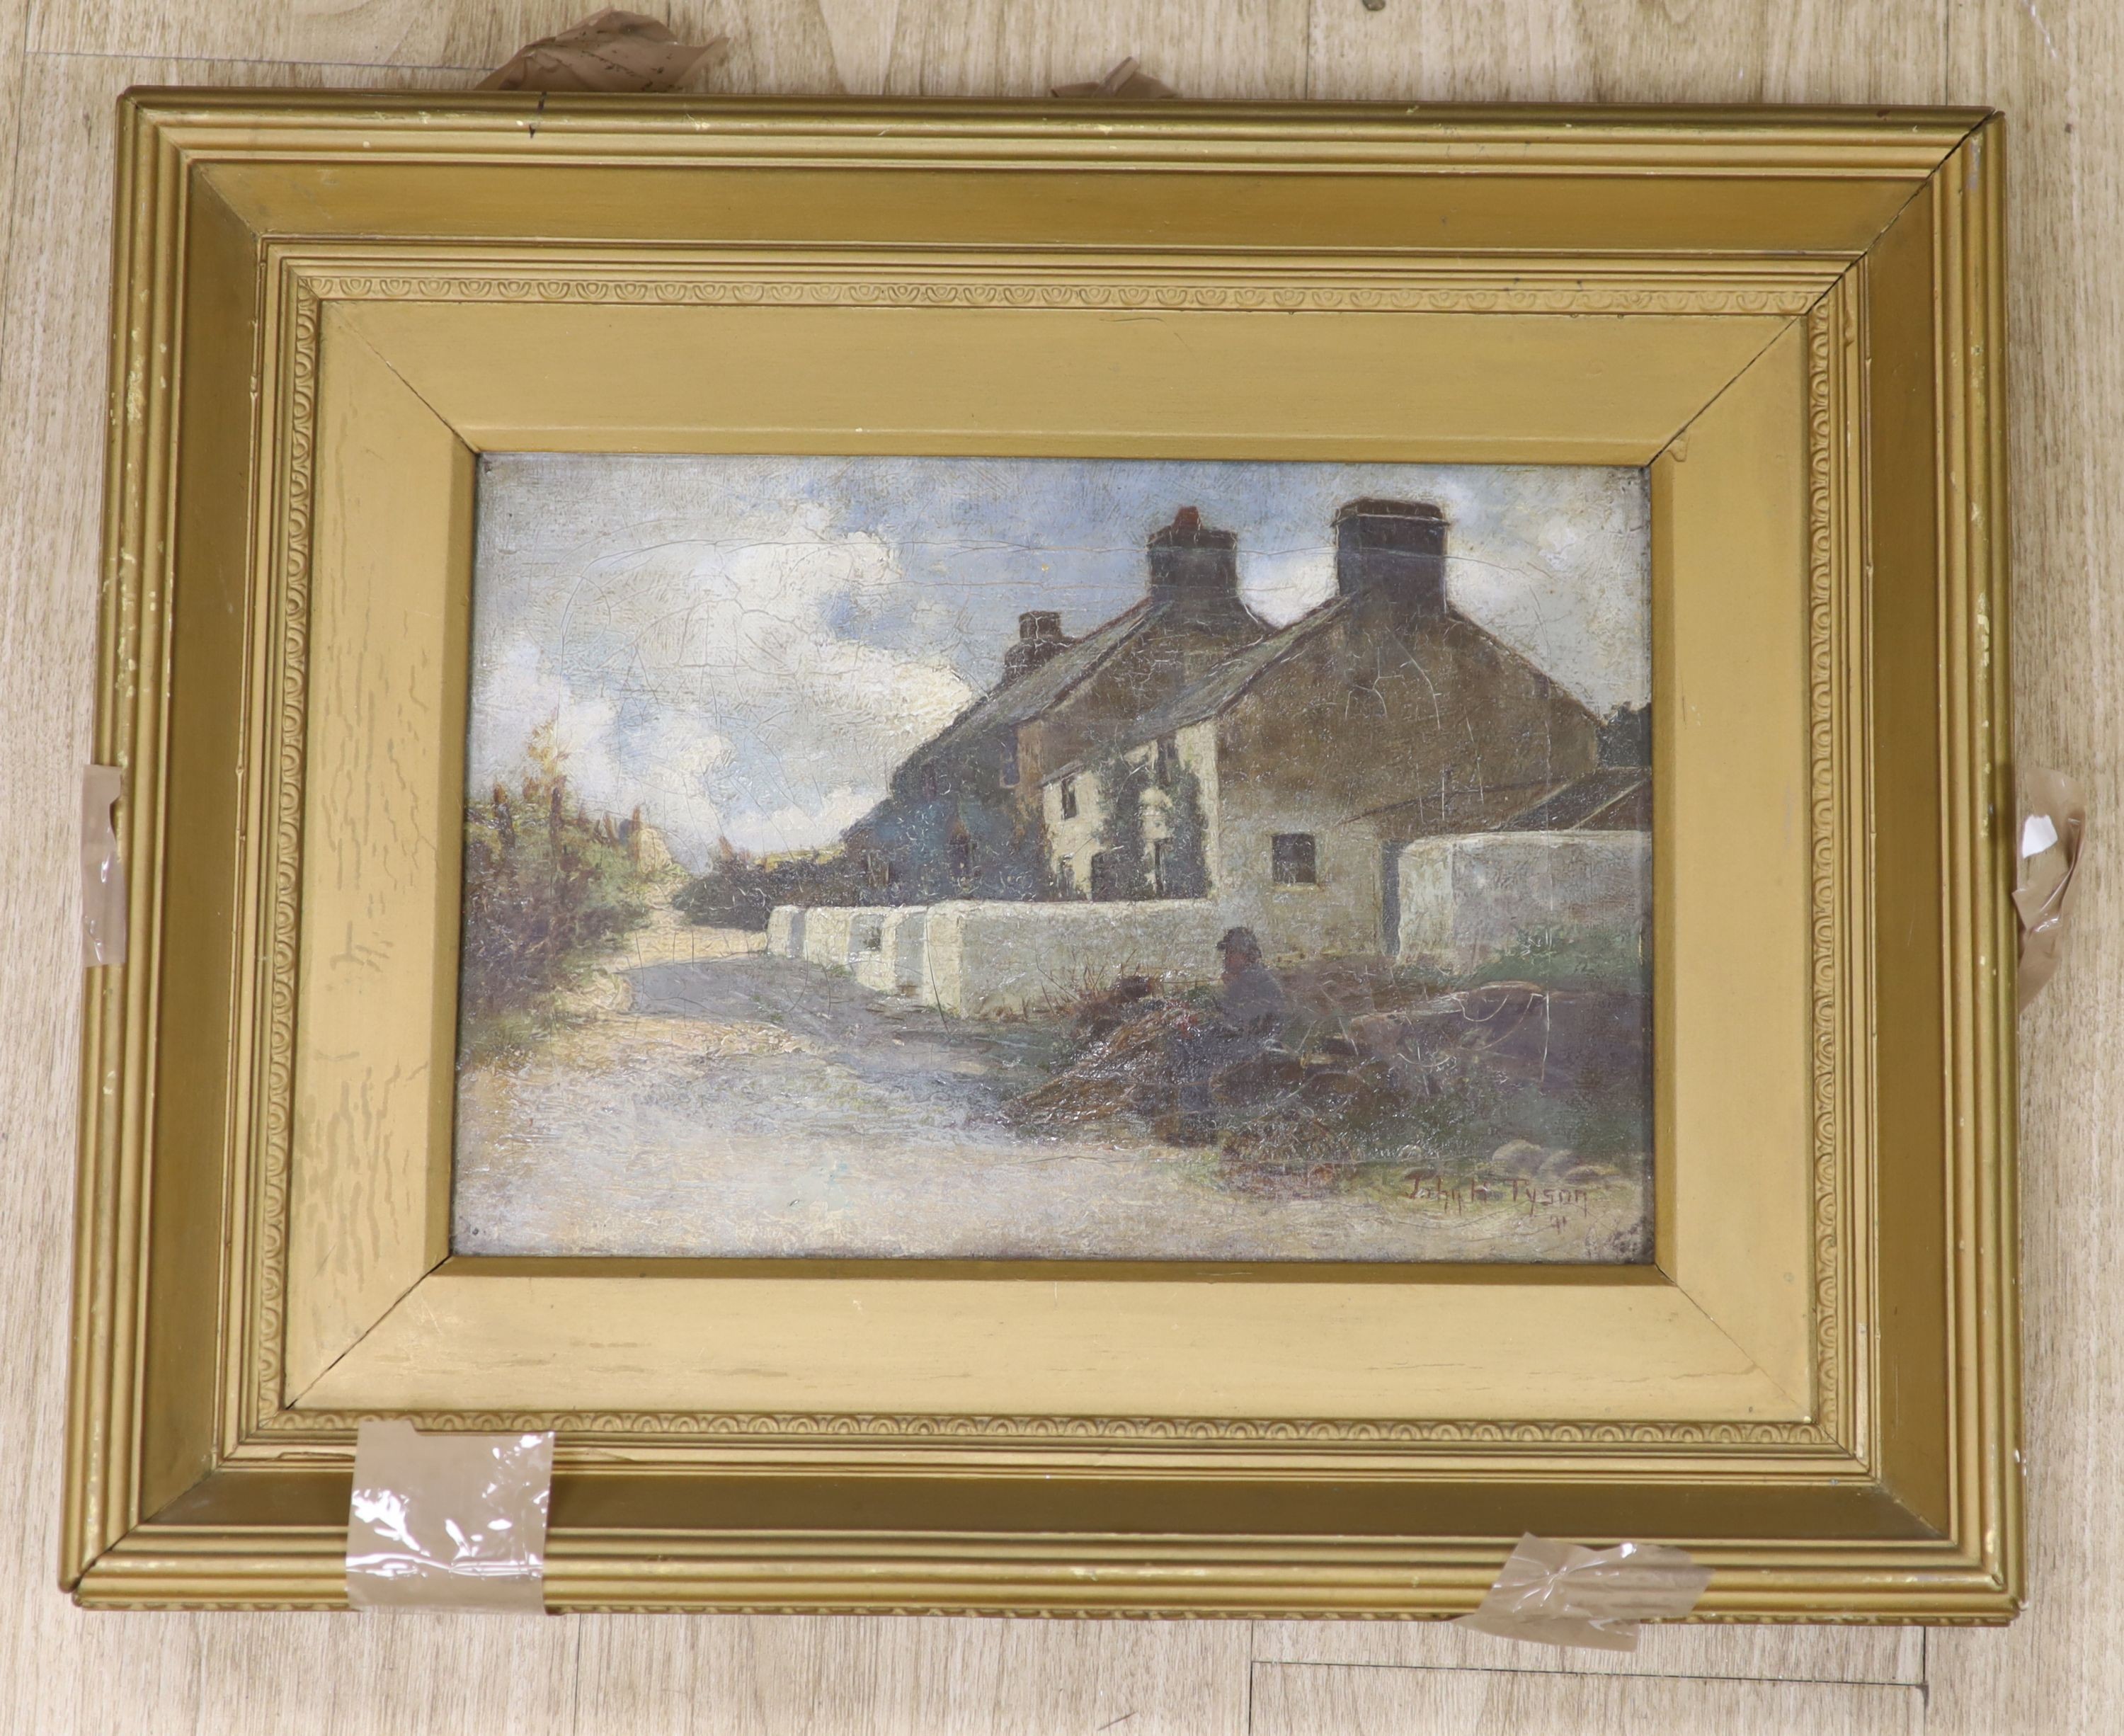 John H. Tyson (fl.1886-1905), oil on canvas, Lobster pot maker beside cottages, signed and dated '91, 22 x 32cm